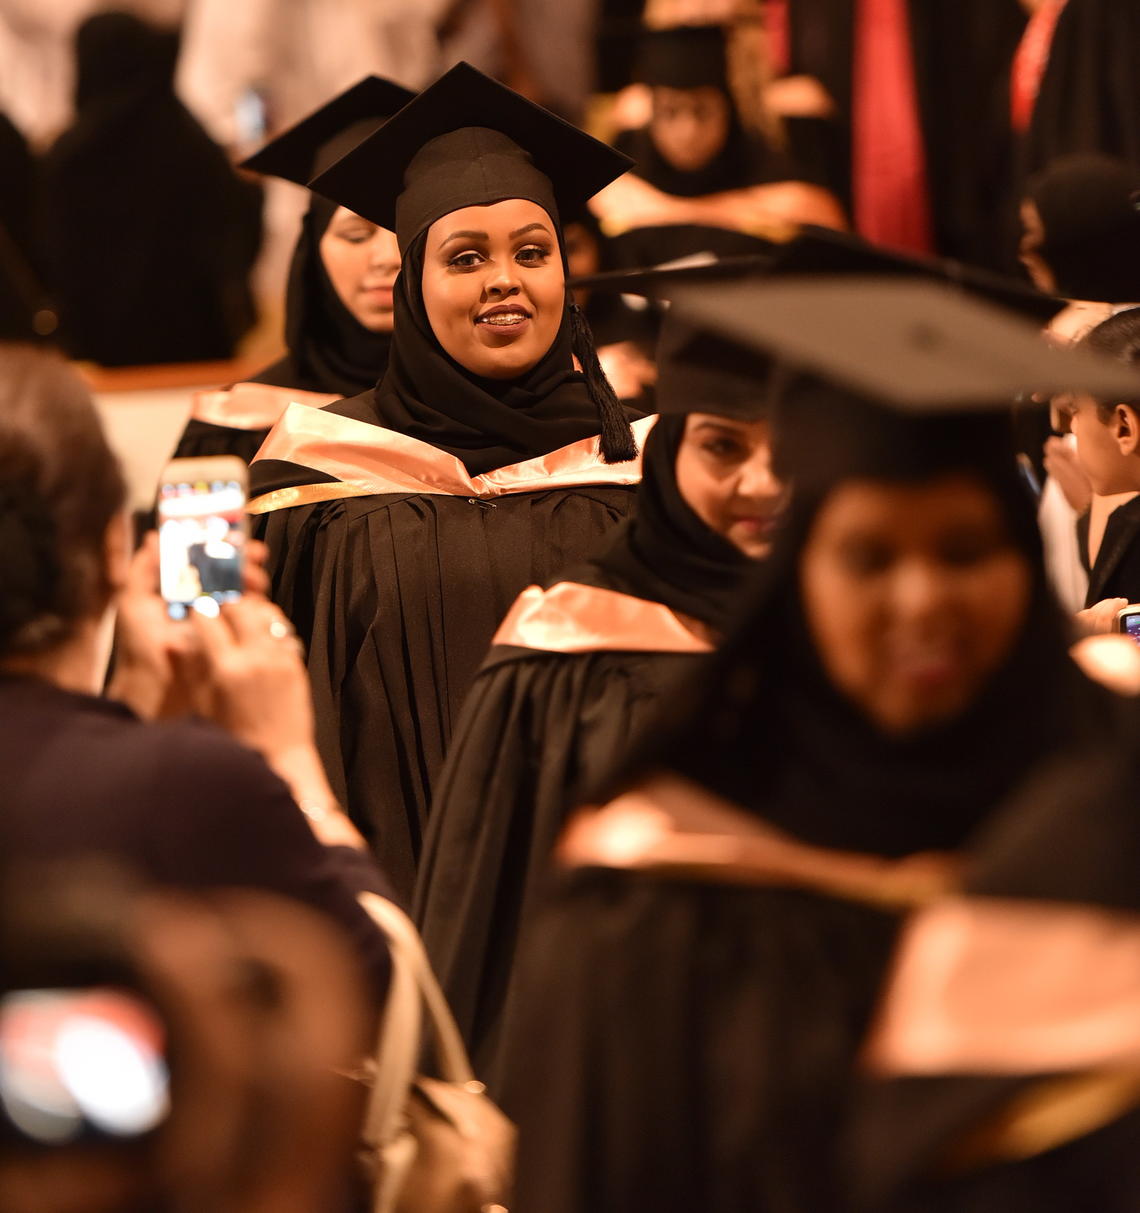 A total of 558 students have now earned their bachelor's degrees from University of Calgary in Qatar, while 54 have graduated from the master's program.